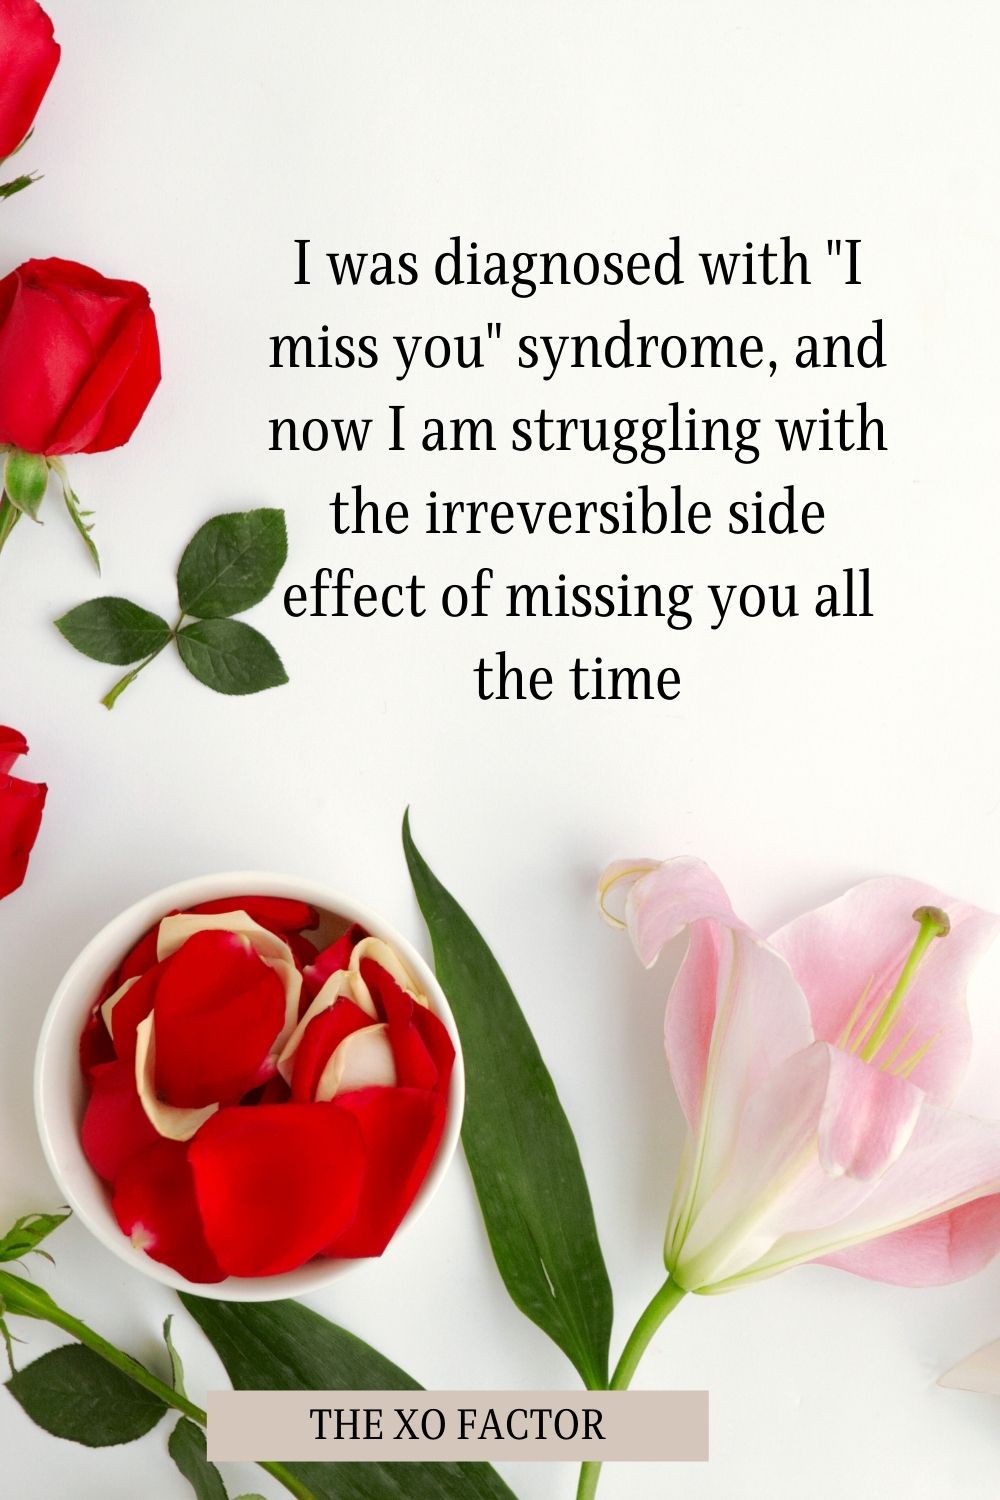 I was diagnosed with "I miss you" syndrome, and now I am struggling with the irreversible side effect of missing you all the time. 